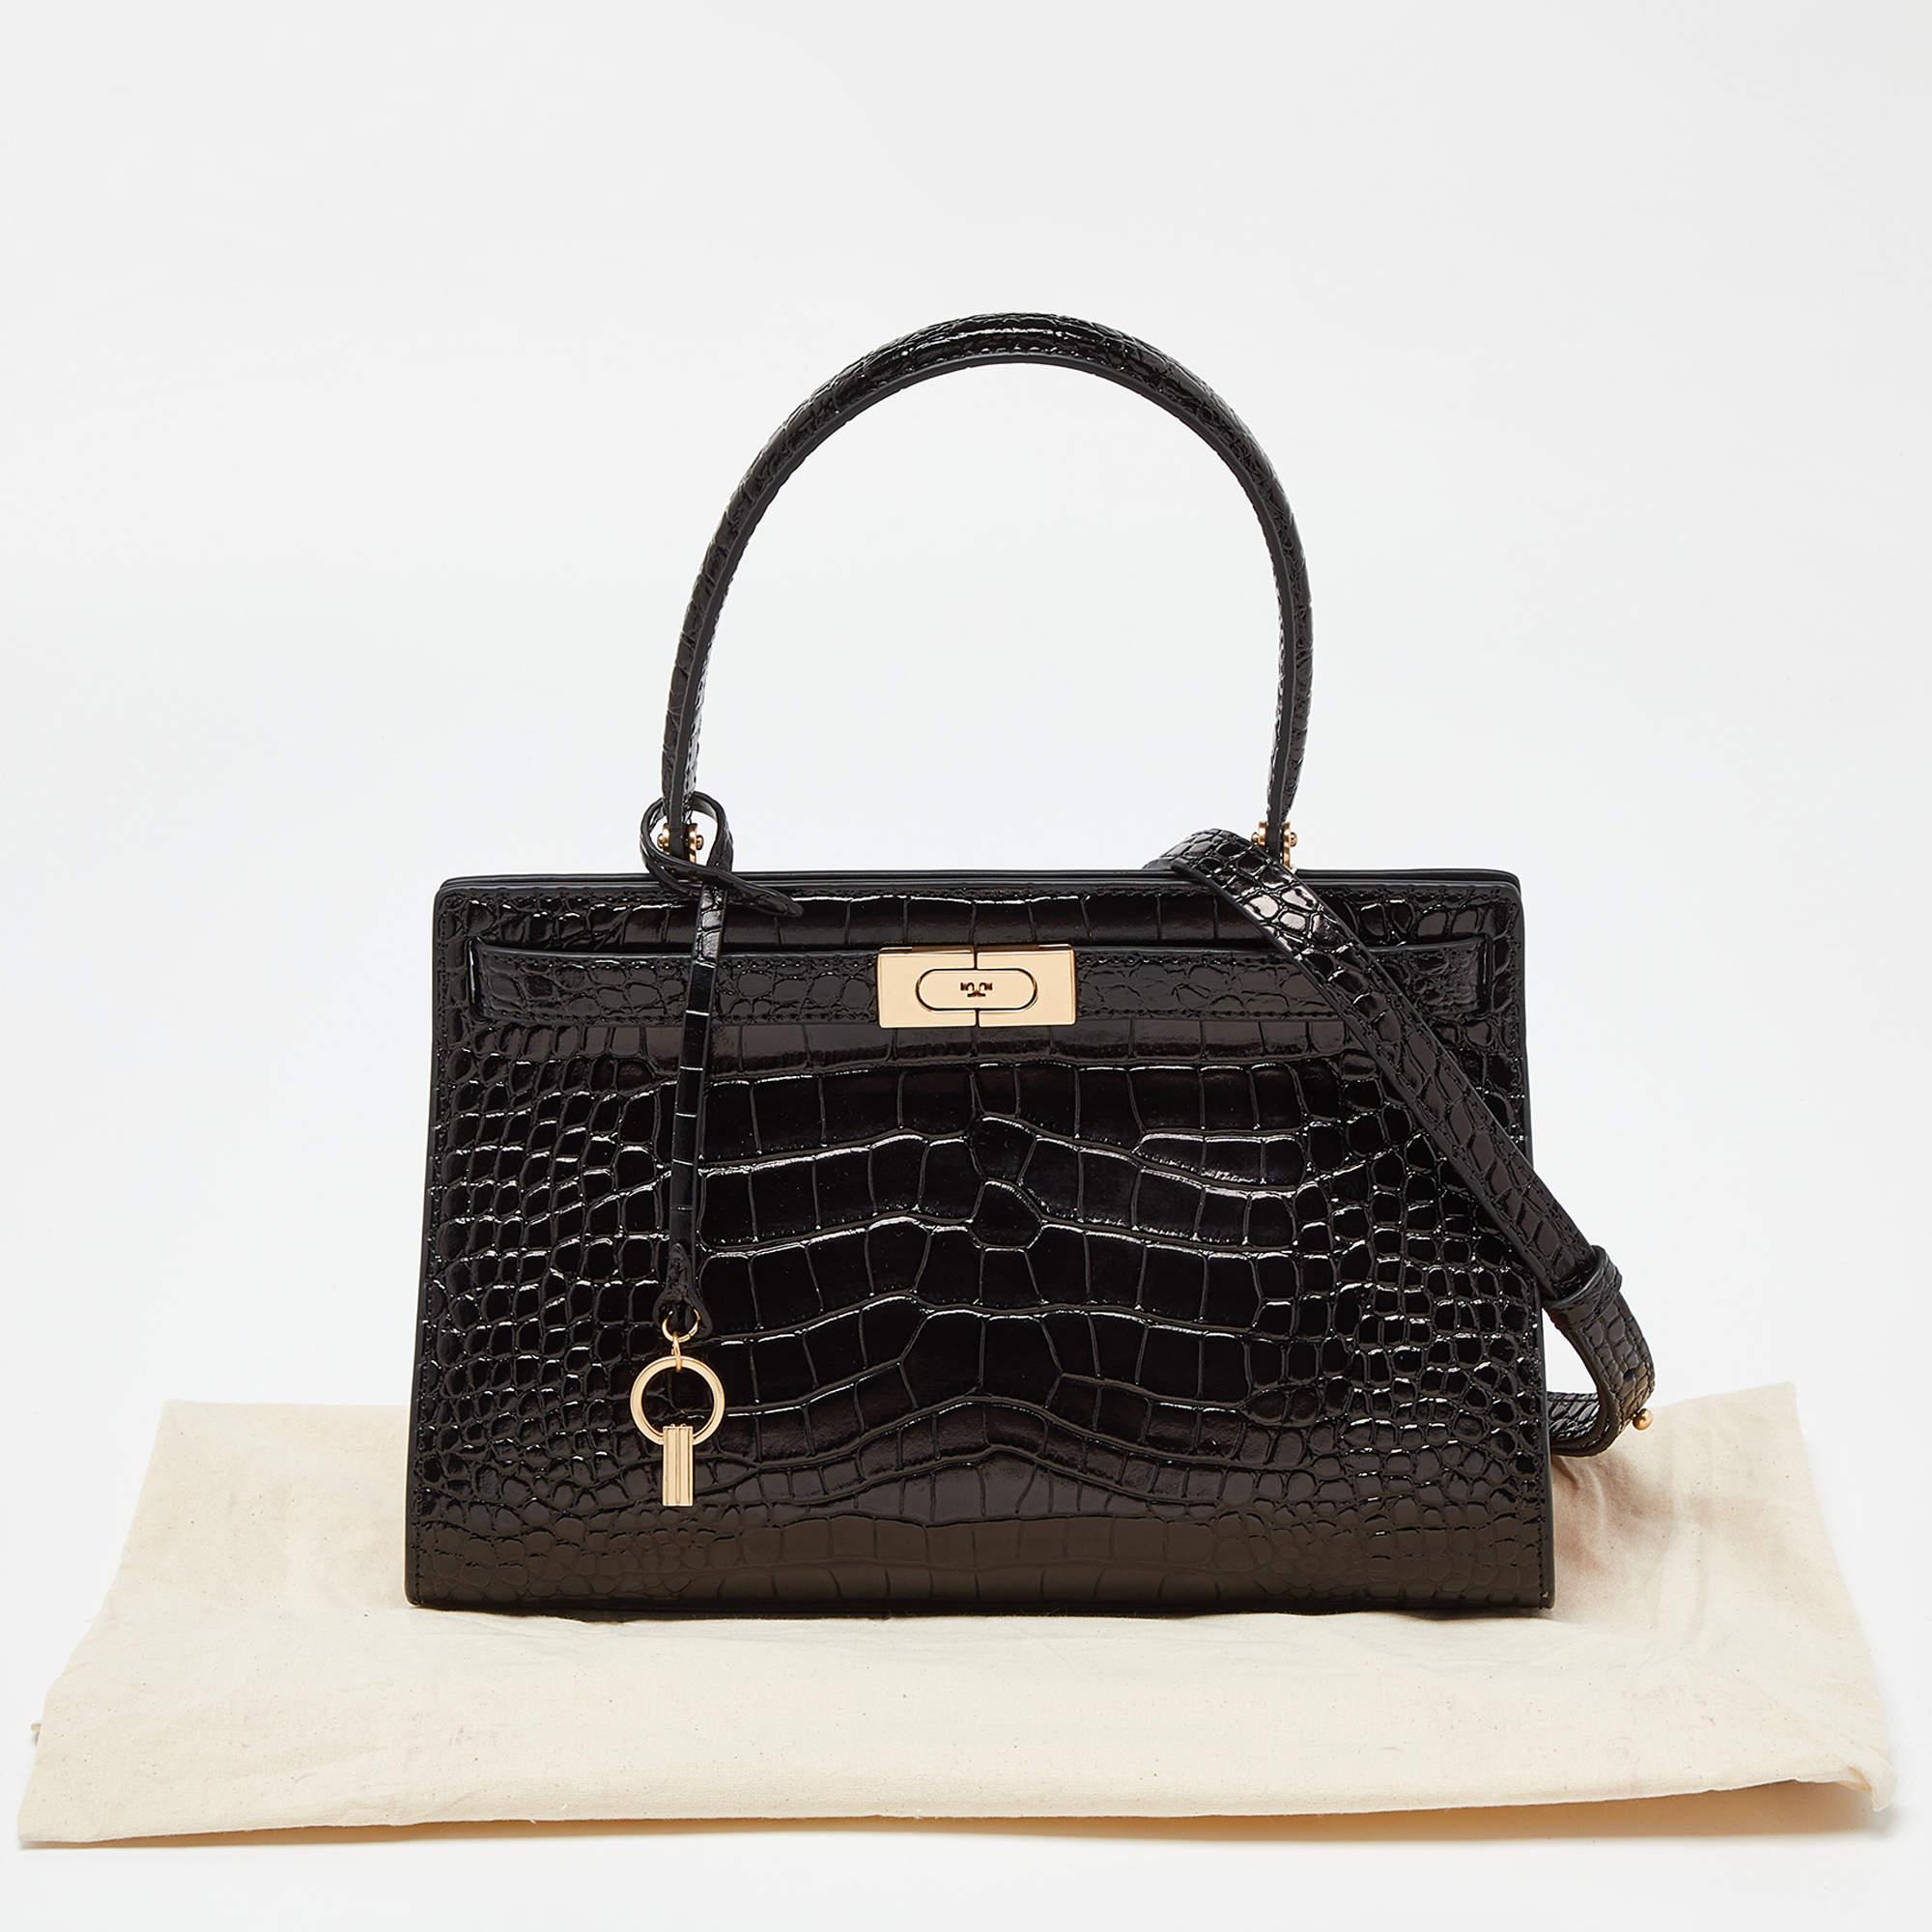 Tory Burch Black Croc Embossed Leather and Suede Small Lee Radziwill Bag 9